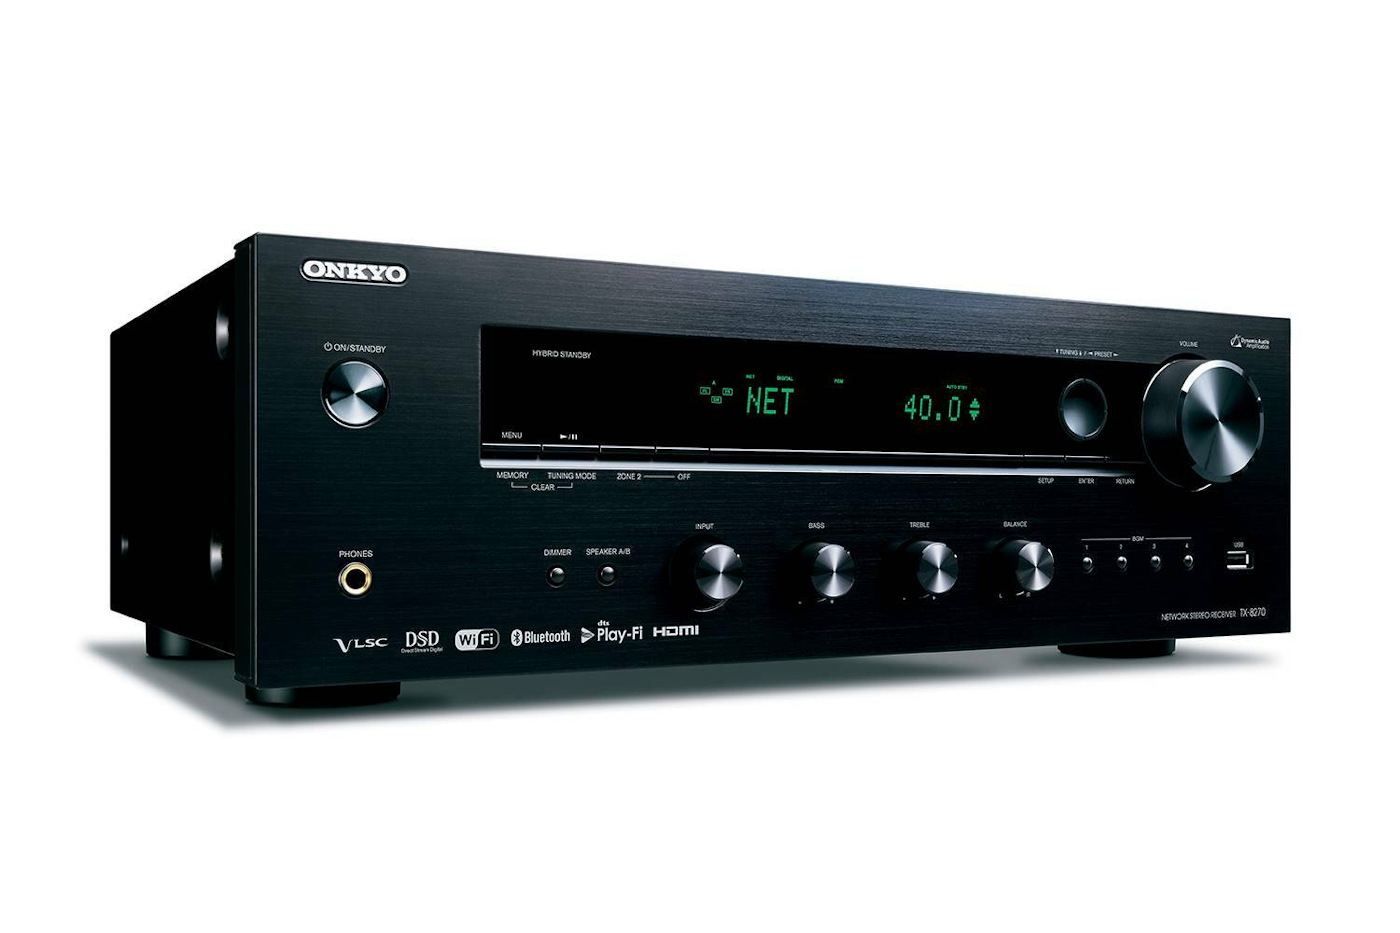 Onkyo TX-8270 Stereo Receiver Side View on White Background